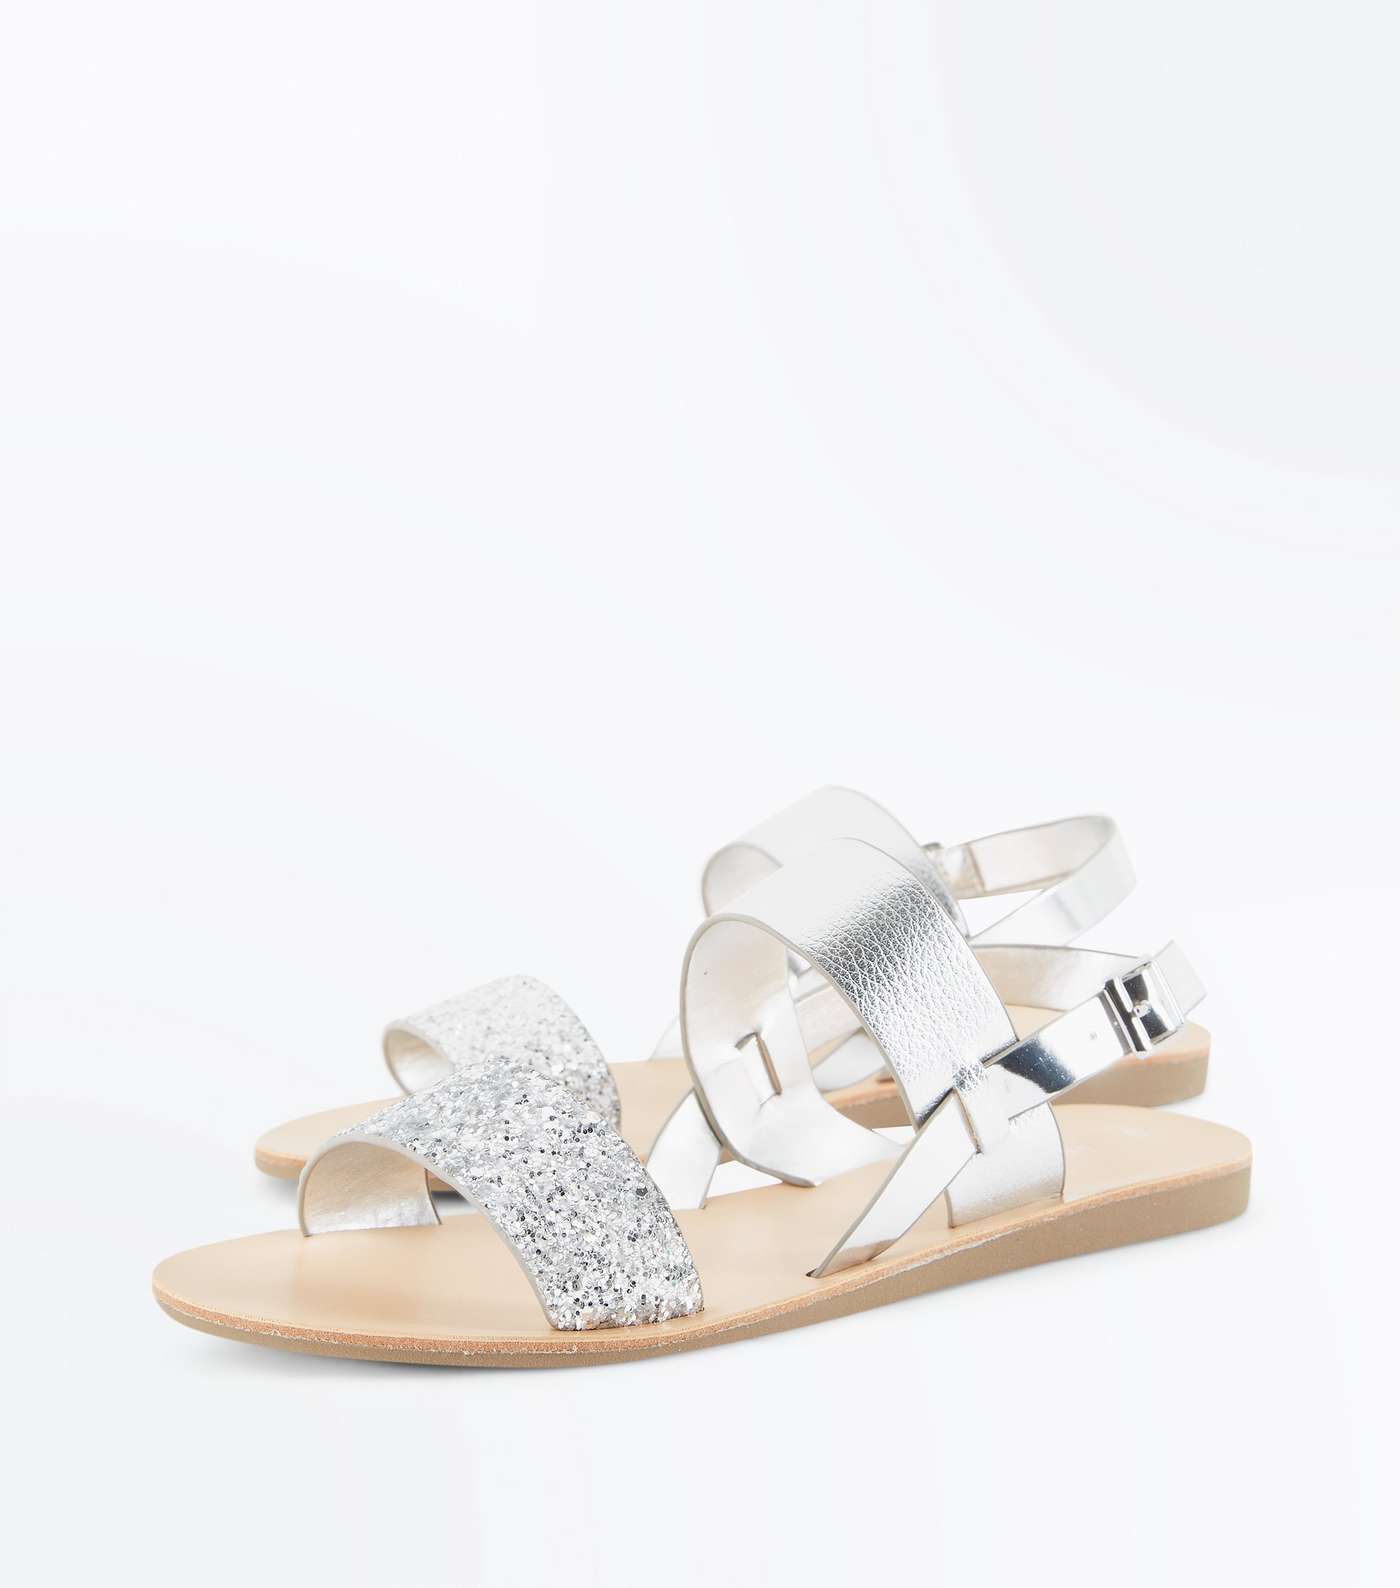 Silver Metallic and Glitter Flat Sandals Image 4